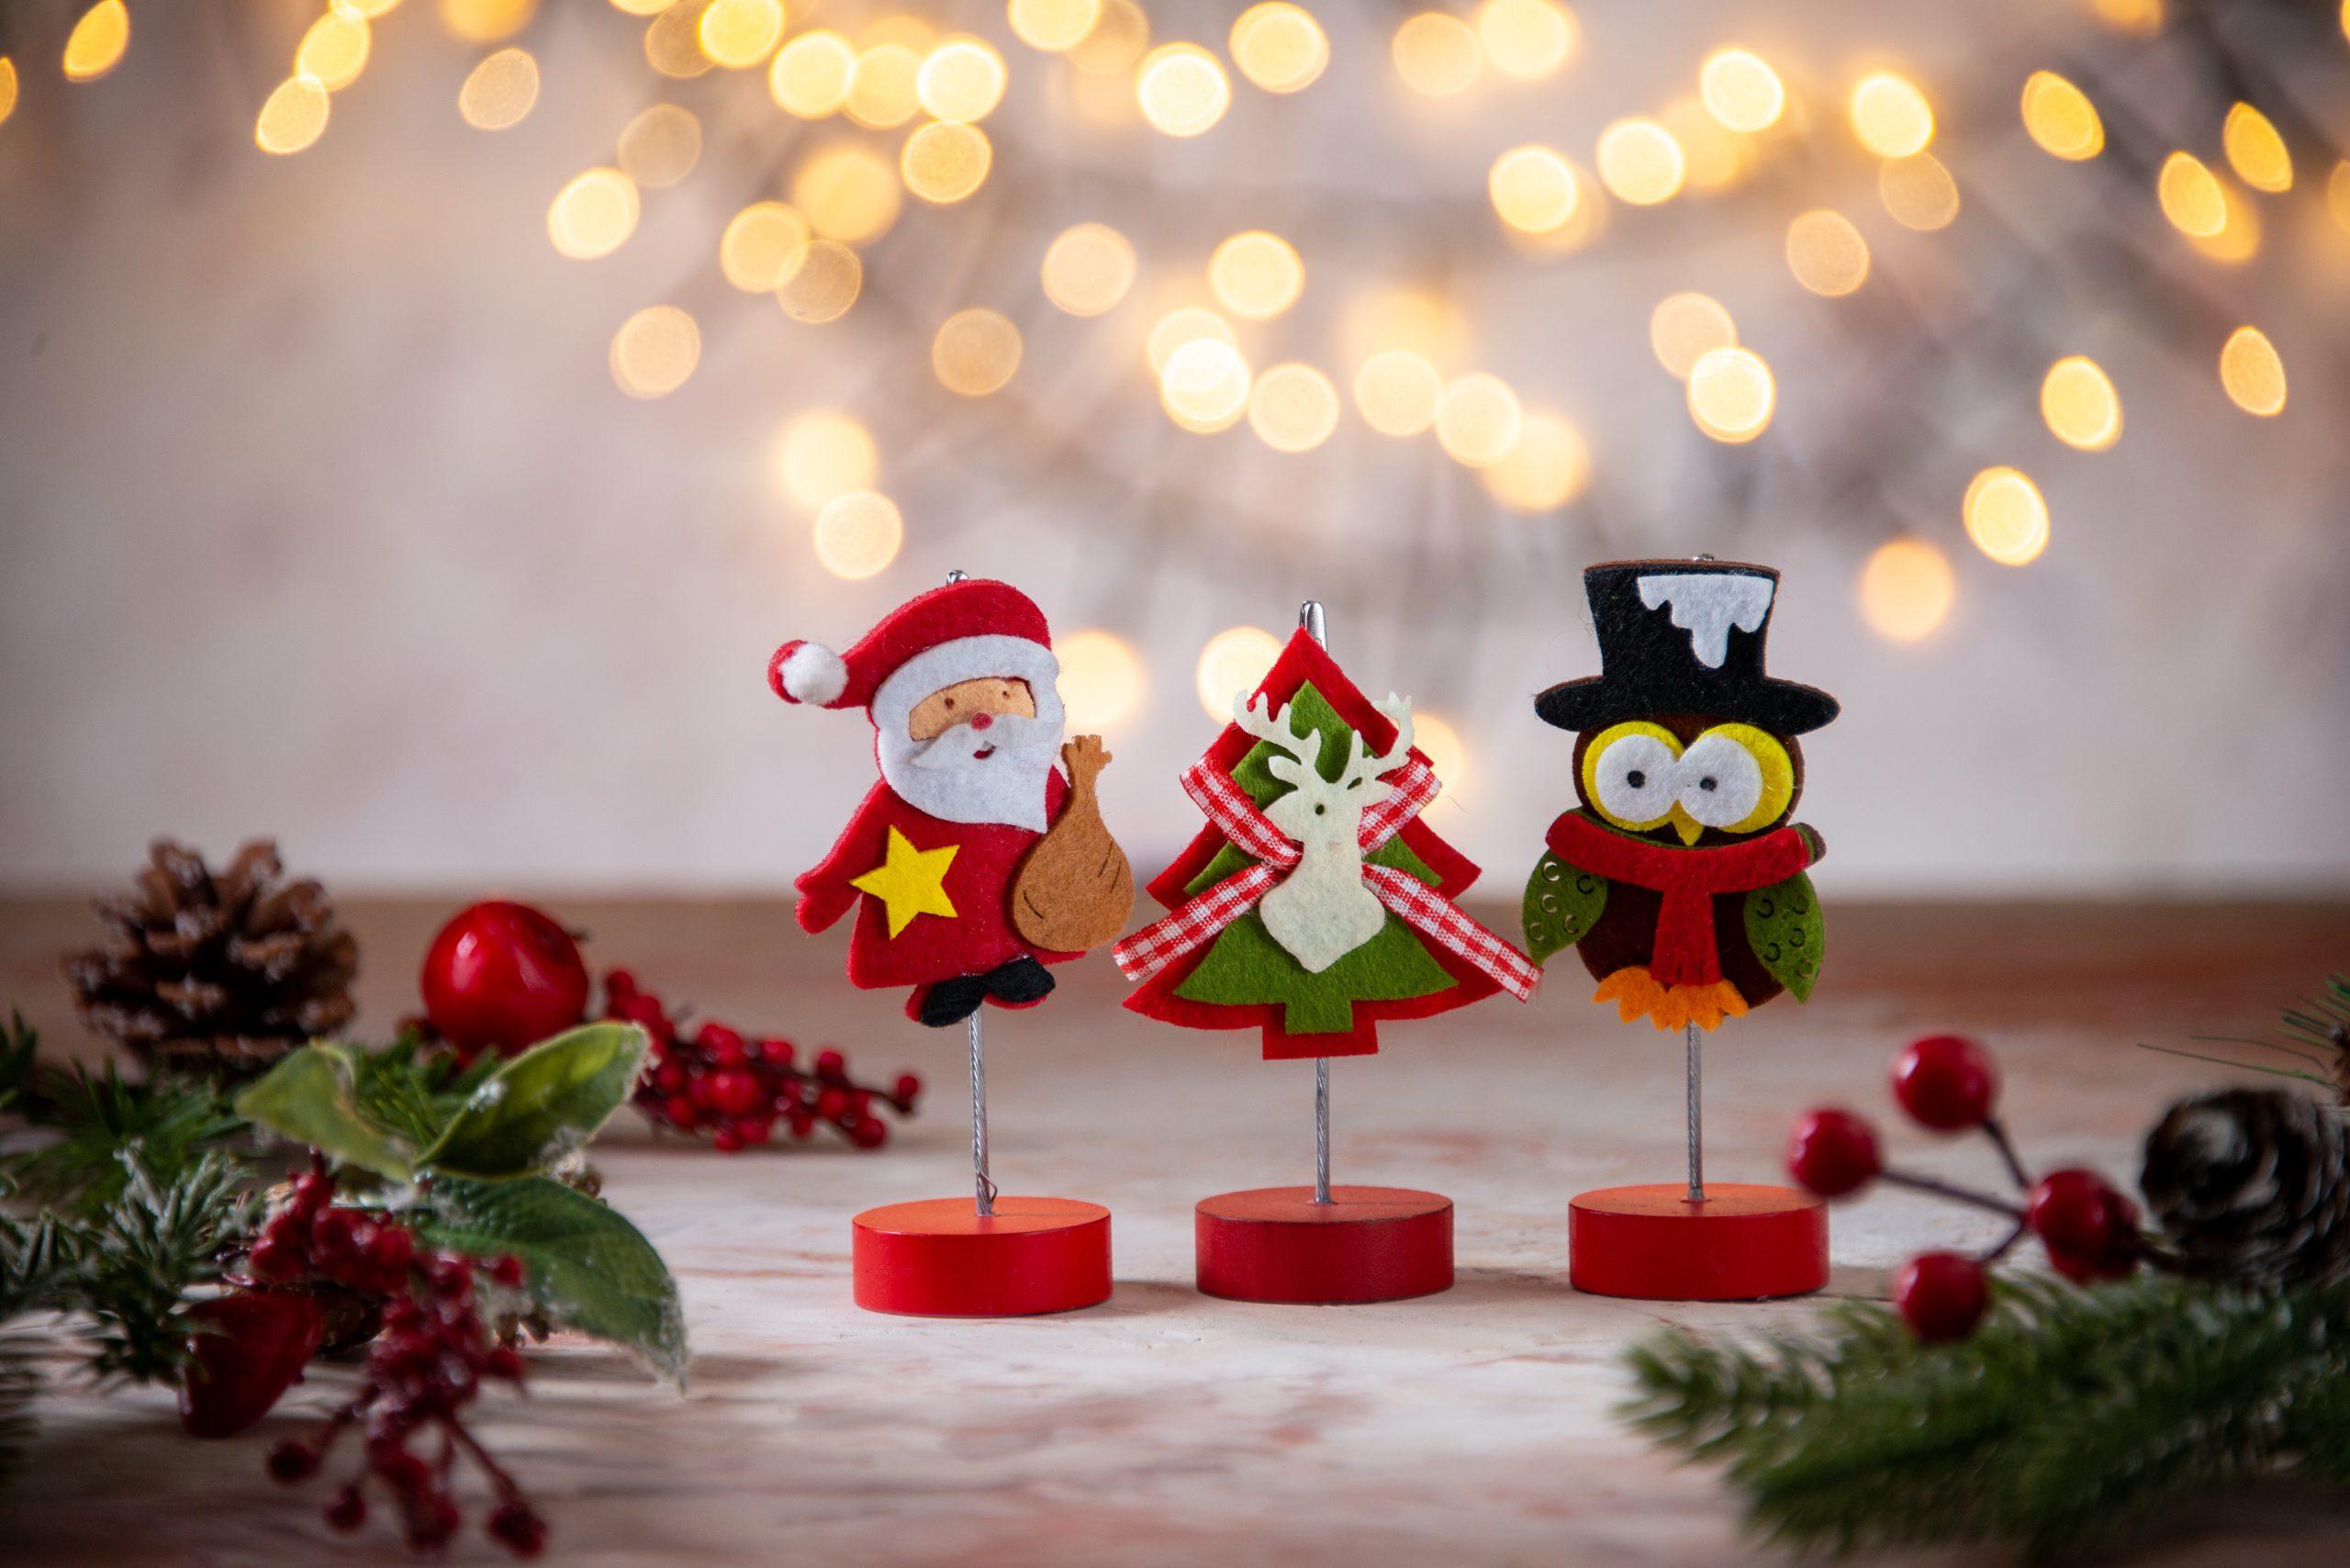 little-santa-decoration-with-owl-figure-xmas-tree-christmas-texture-blurred-background